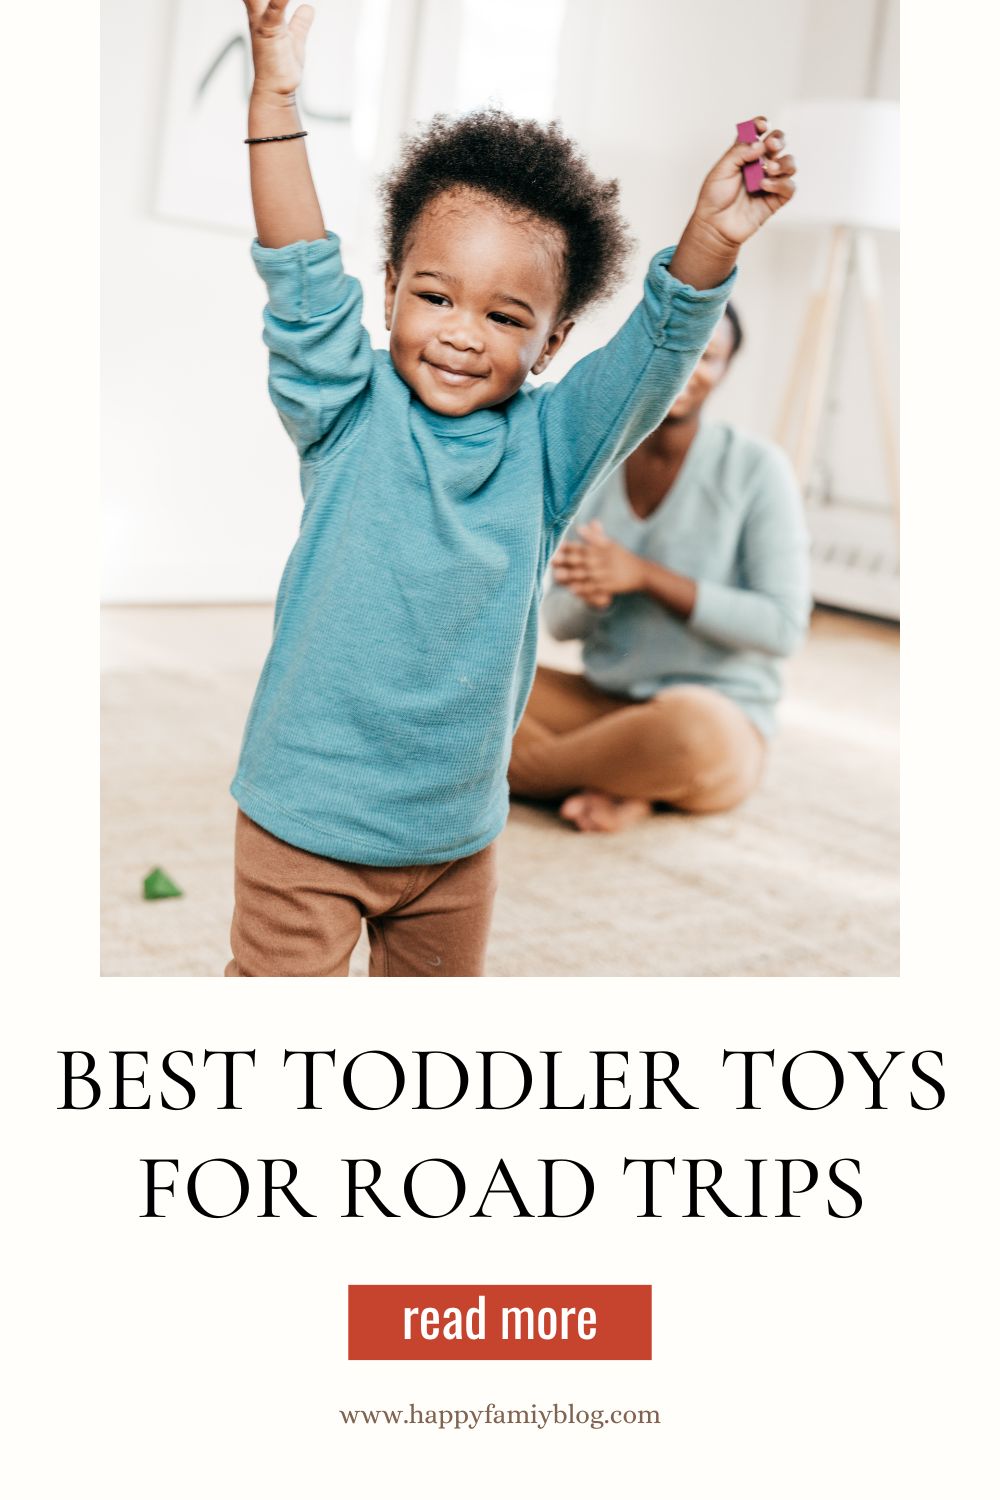 Best Toddler Toys for Road Trips